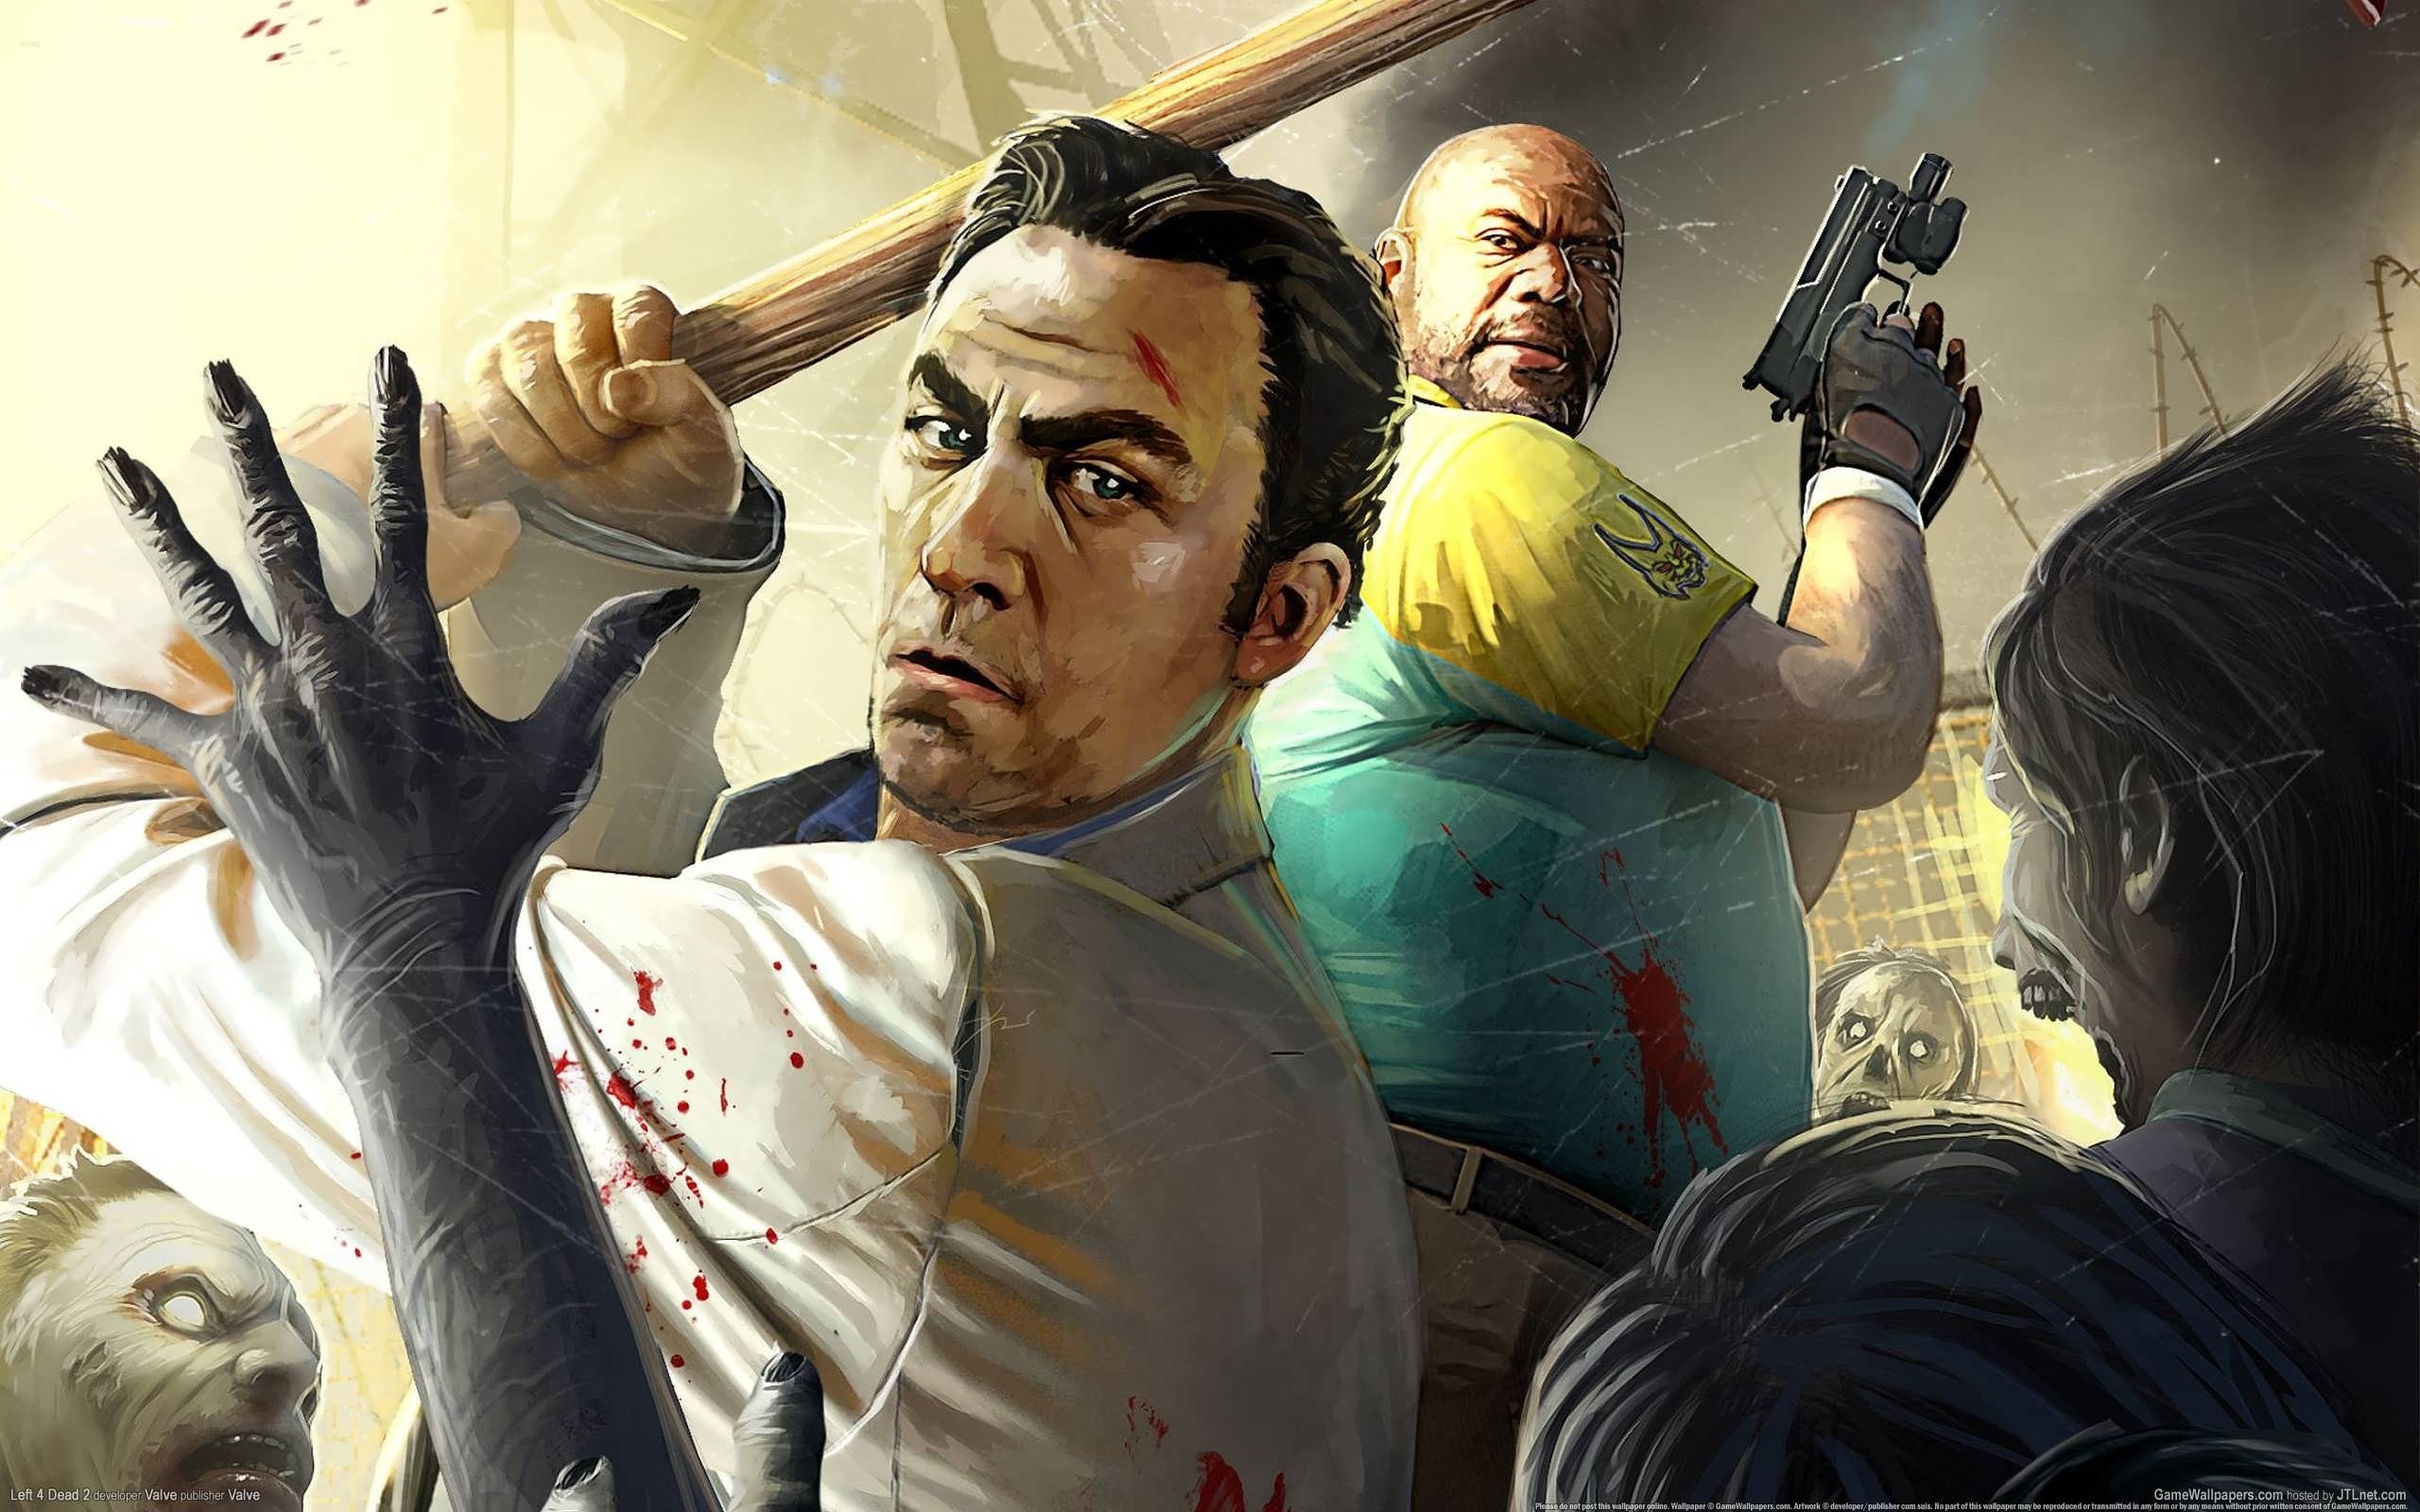 2560x1600 Wallpapers for Desktop: left 4 dead 2 image by Anastasia Thomas (2017-03